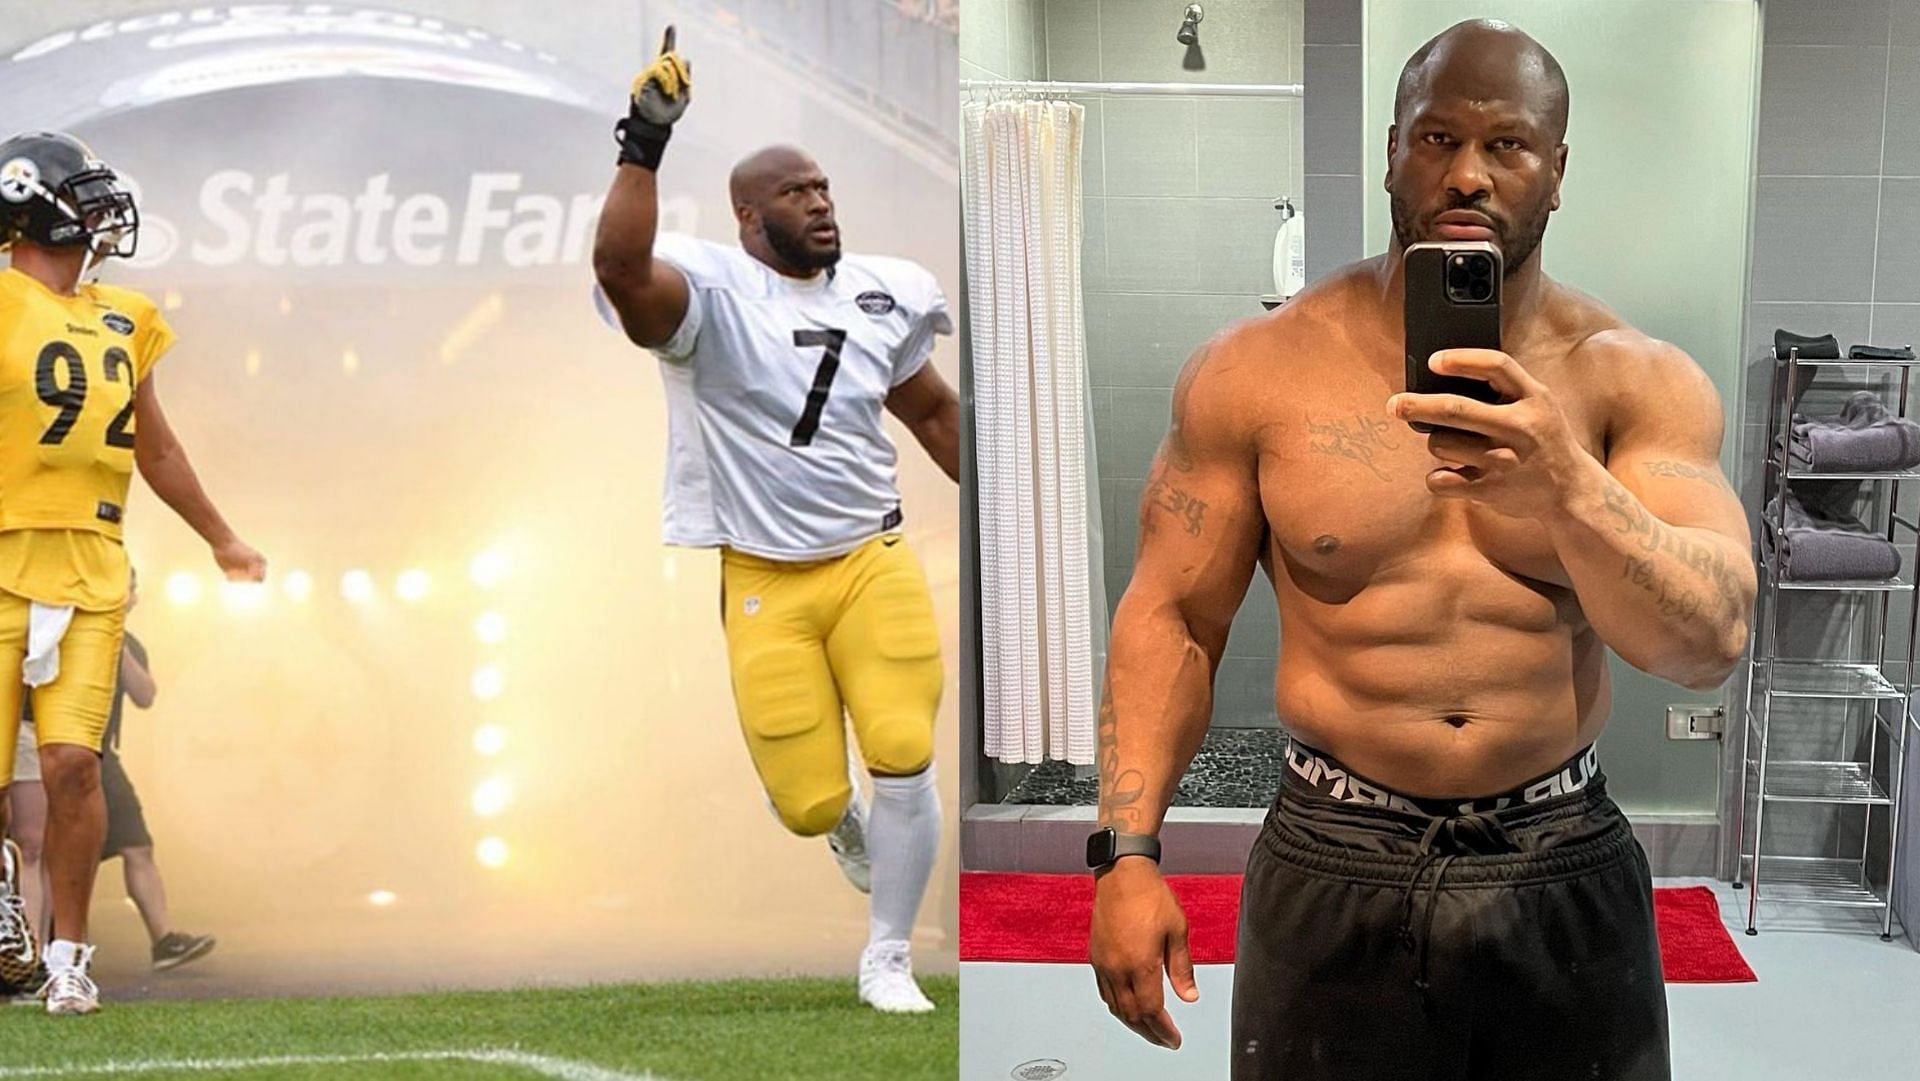 James Harrison continues to train himself even after retirement to maintain his strength as he ages (Image via Instagram)